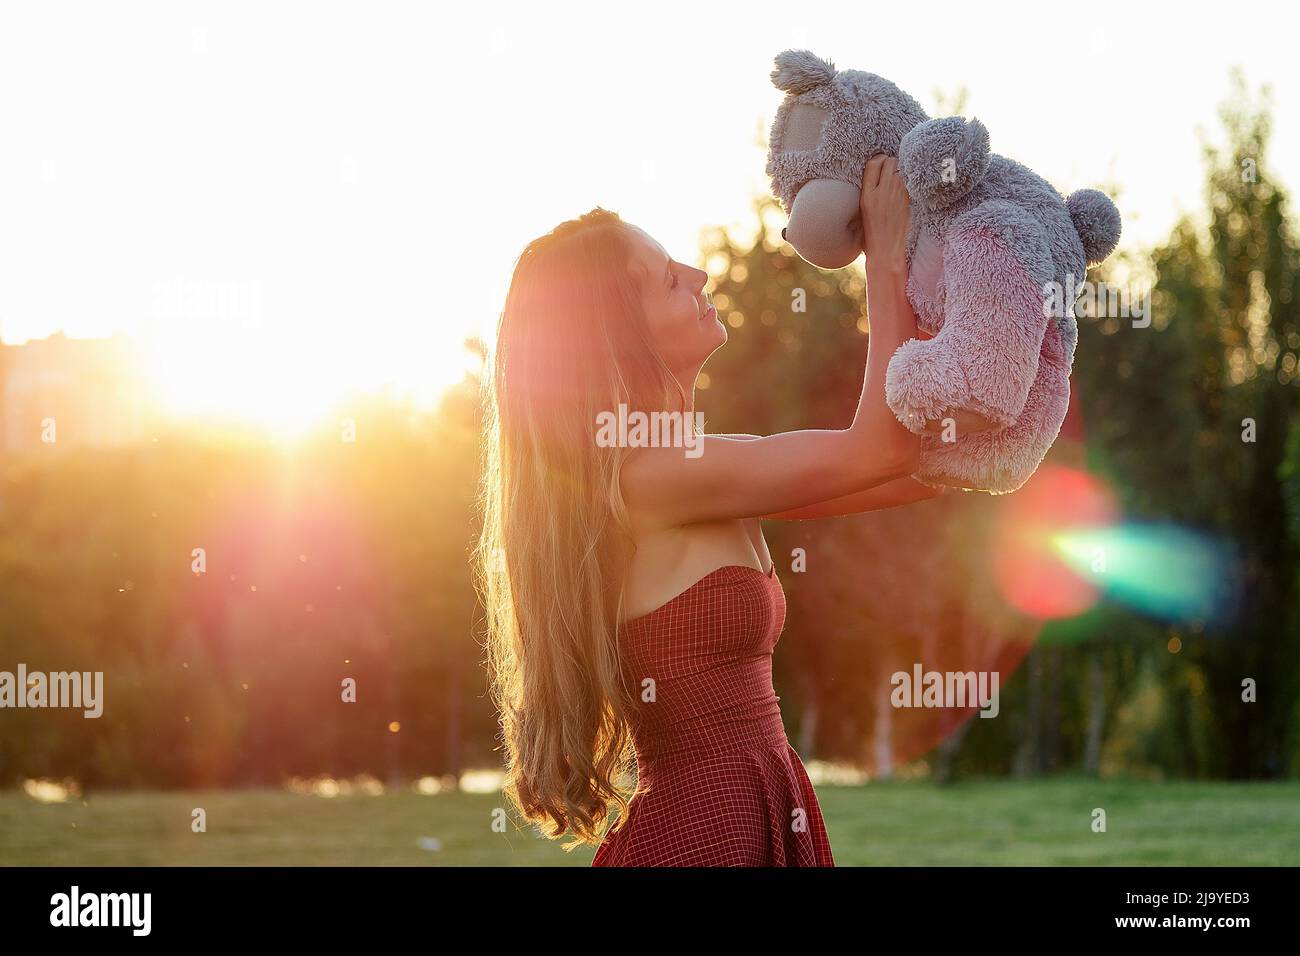 cute long-haired tanned woman enigmatic smile in a red dress holding a gray teddy bear toy in hands in the park trees background Stock Photo